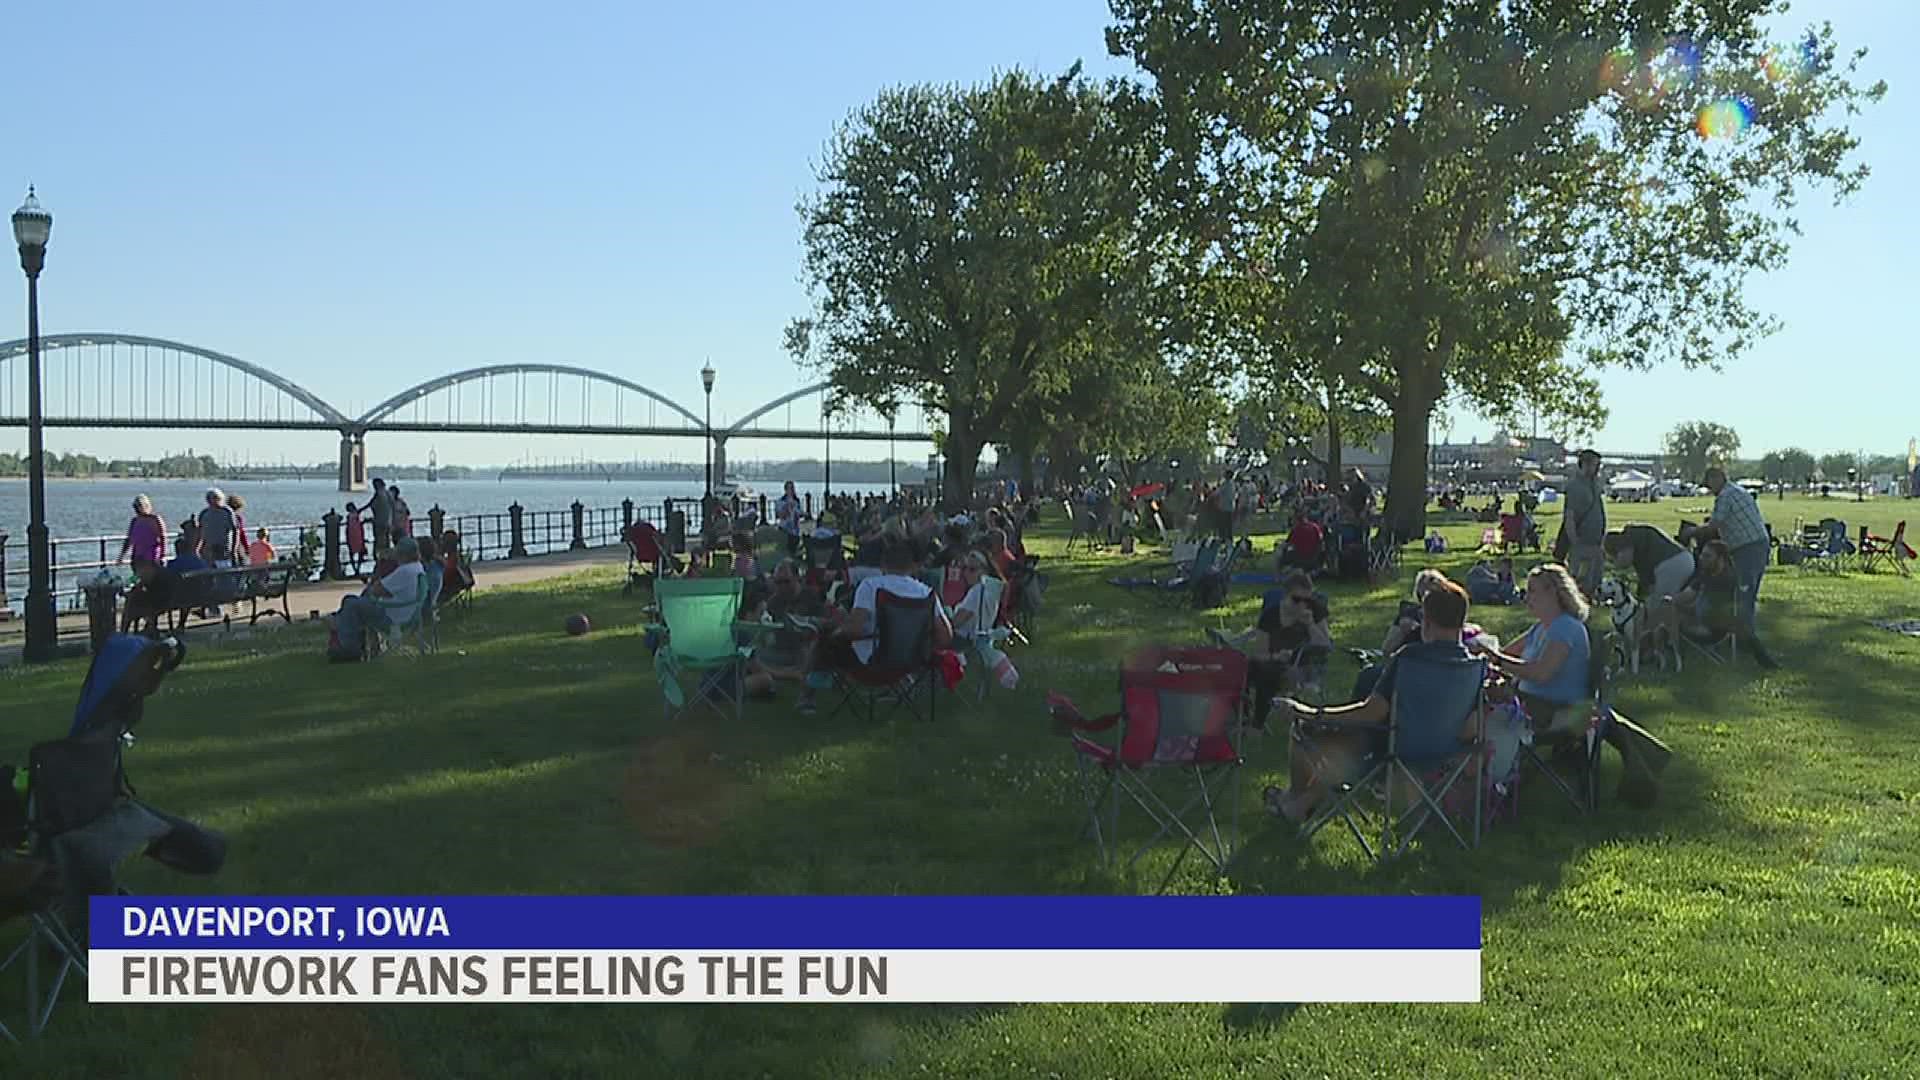 Hundreds of people staked out the viewing areas early and god good spots along the river just before the Red White and Boom fireworks took off at dusk on Sunday.